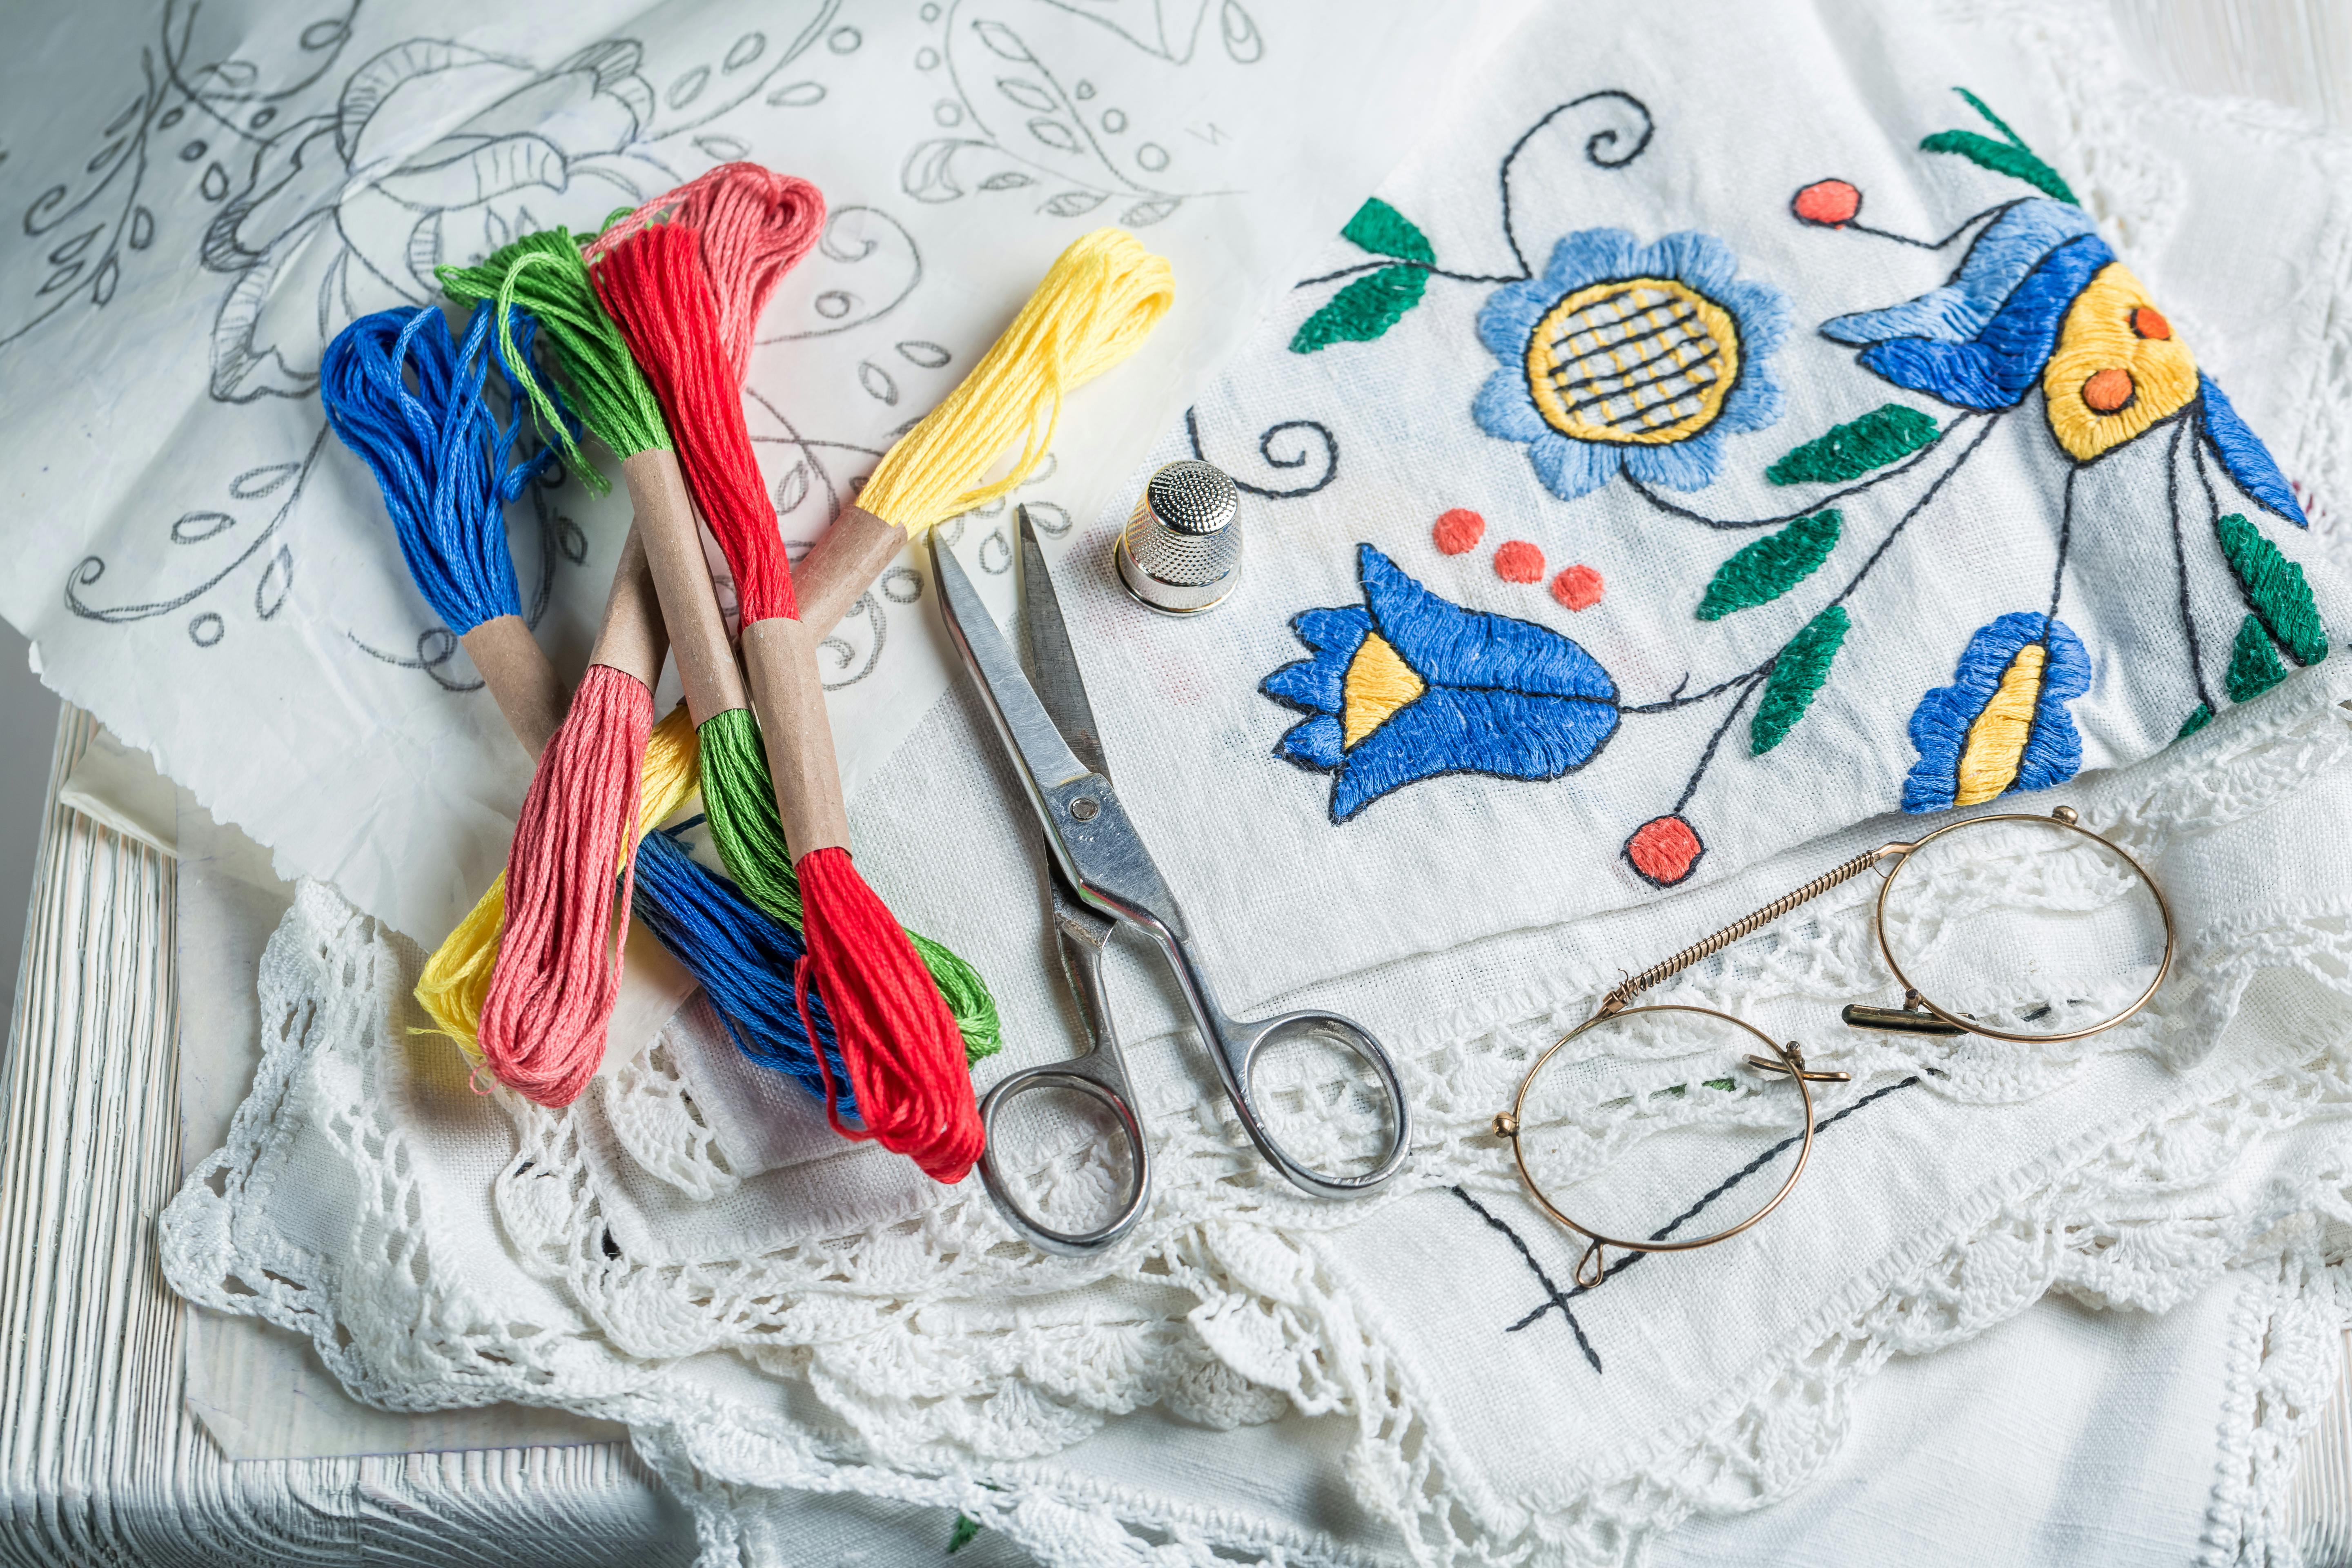  photo of embroidery supplies like threads, scissors, thimble, needles and a pattern